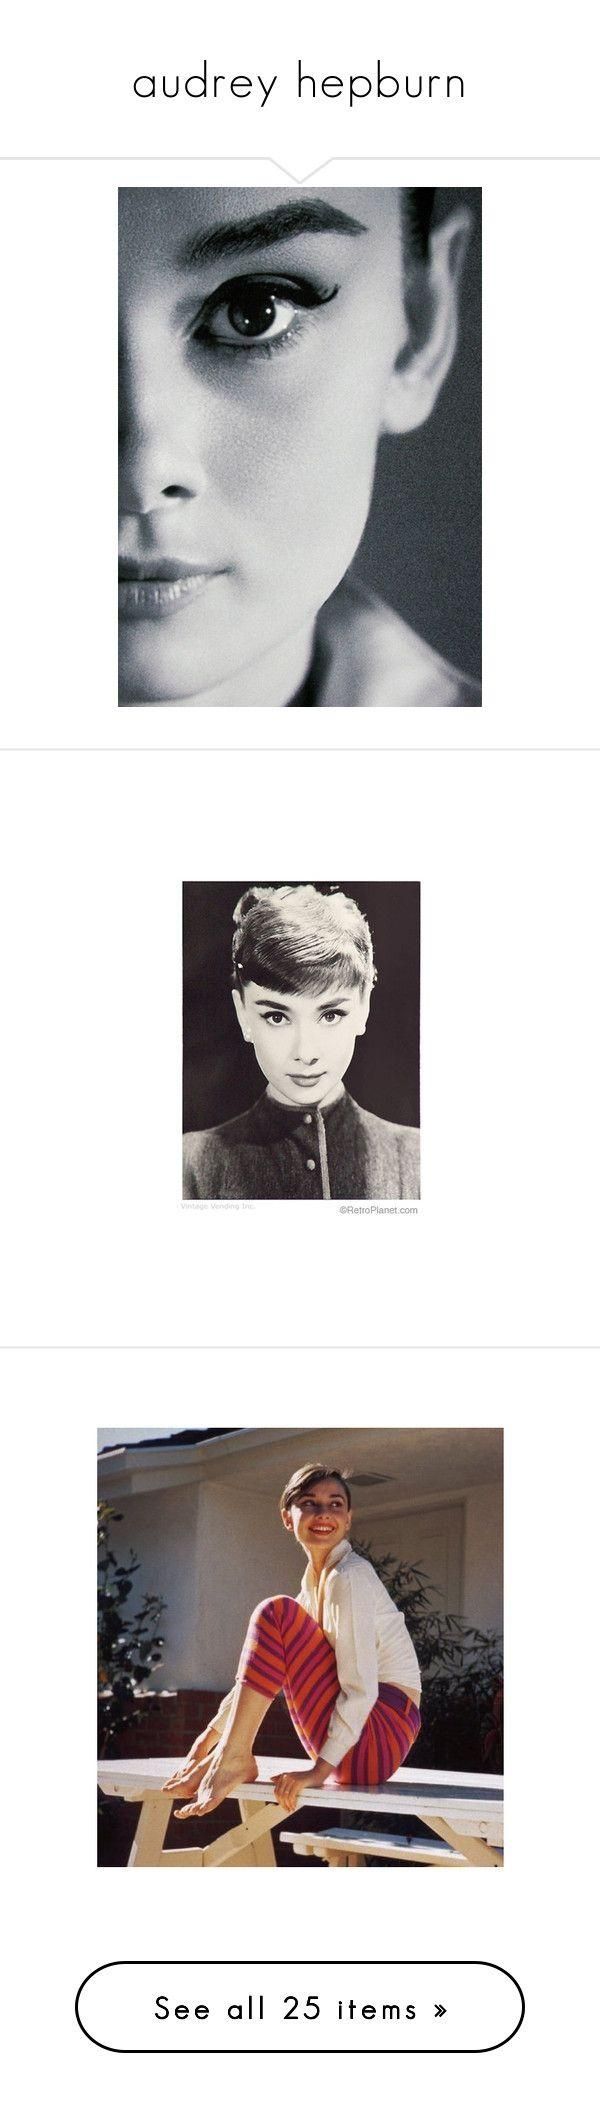 The 25+ Best Audrey Hepburn Poster Ideas On Pinterest | Audrey Pertaining To Glamorous Audrey Hepburn Wall Art (View 20 of 20)